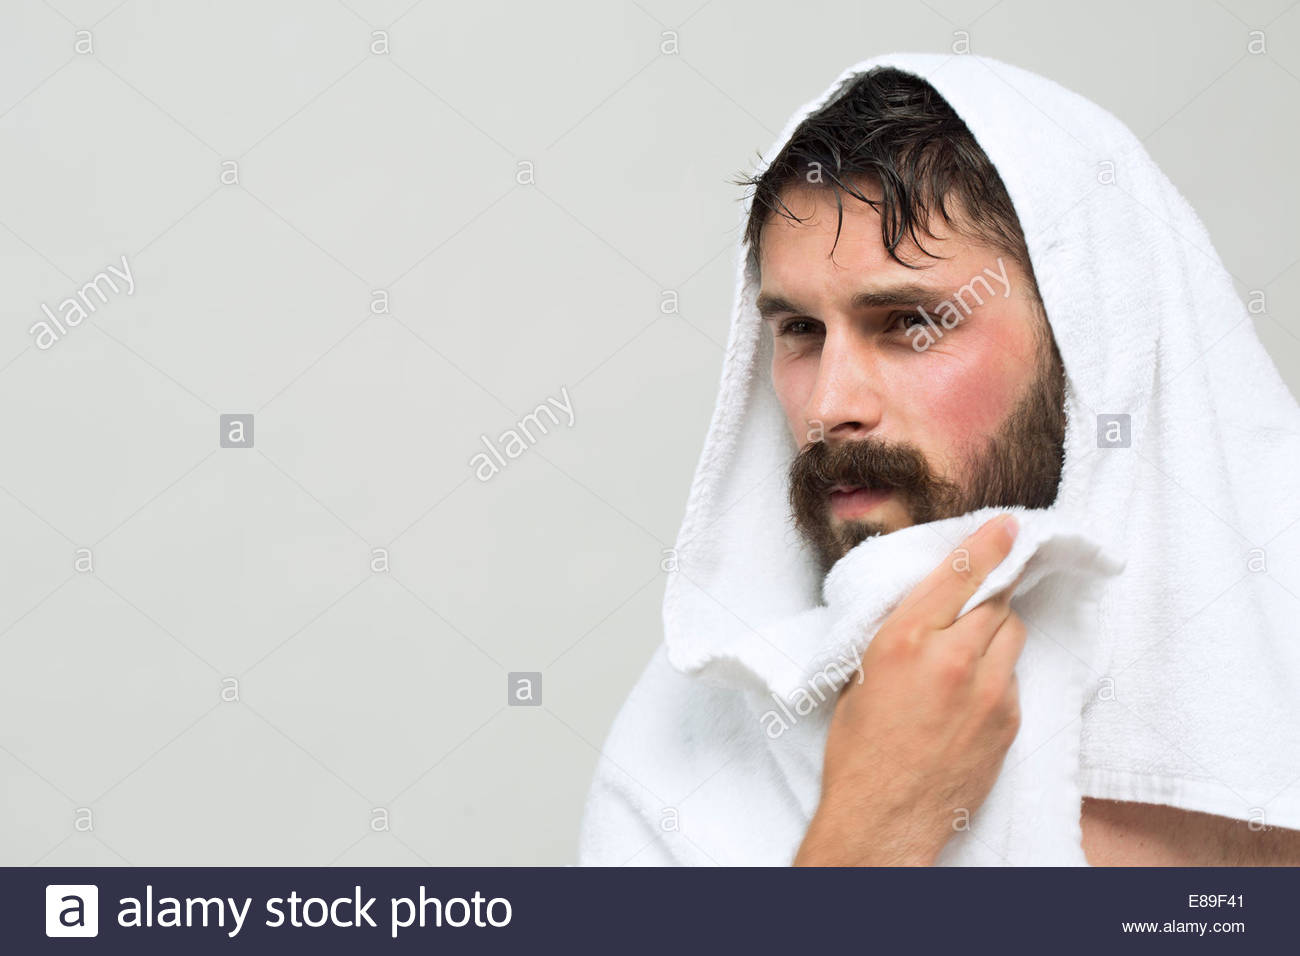 Brunette man drying beard with towel Stock Photo